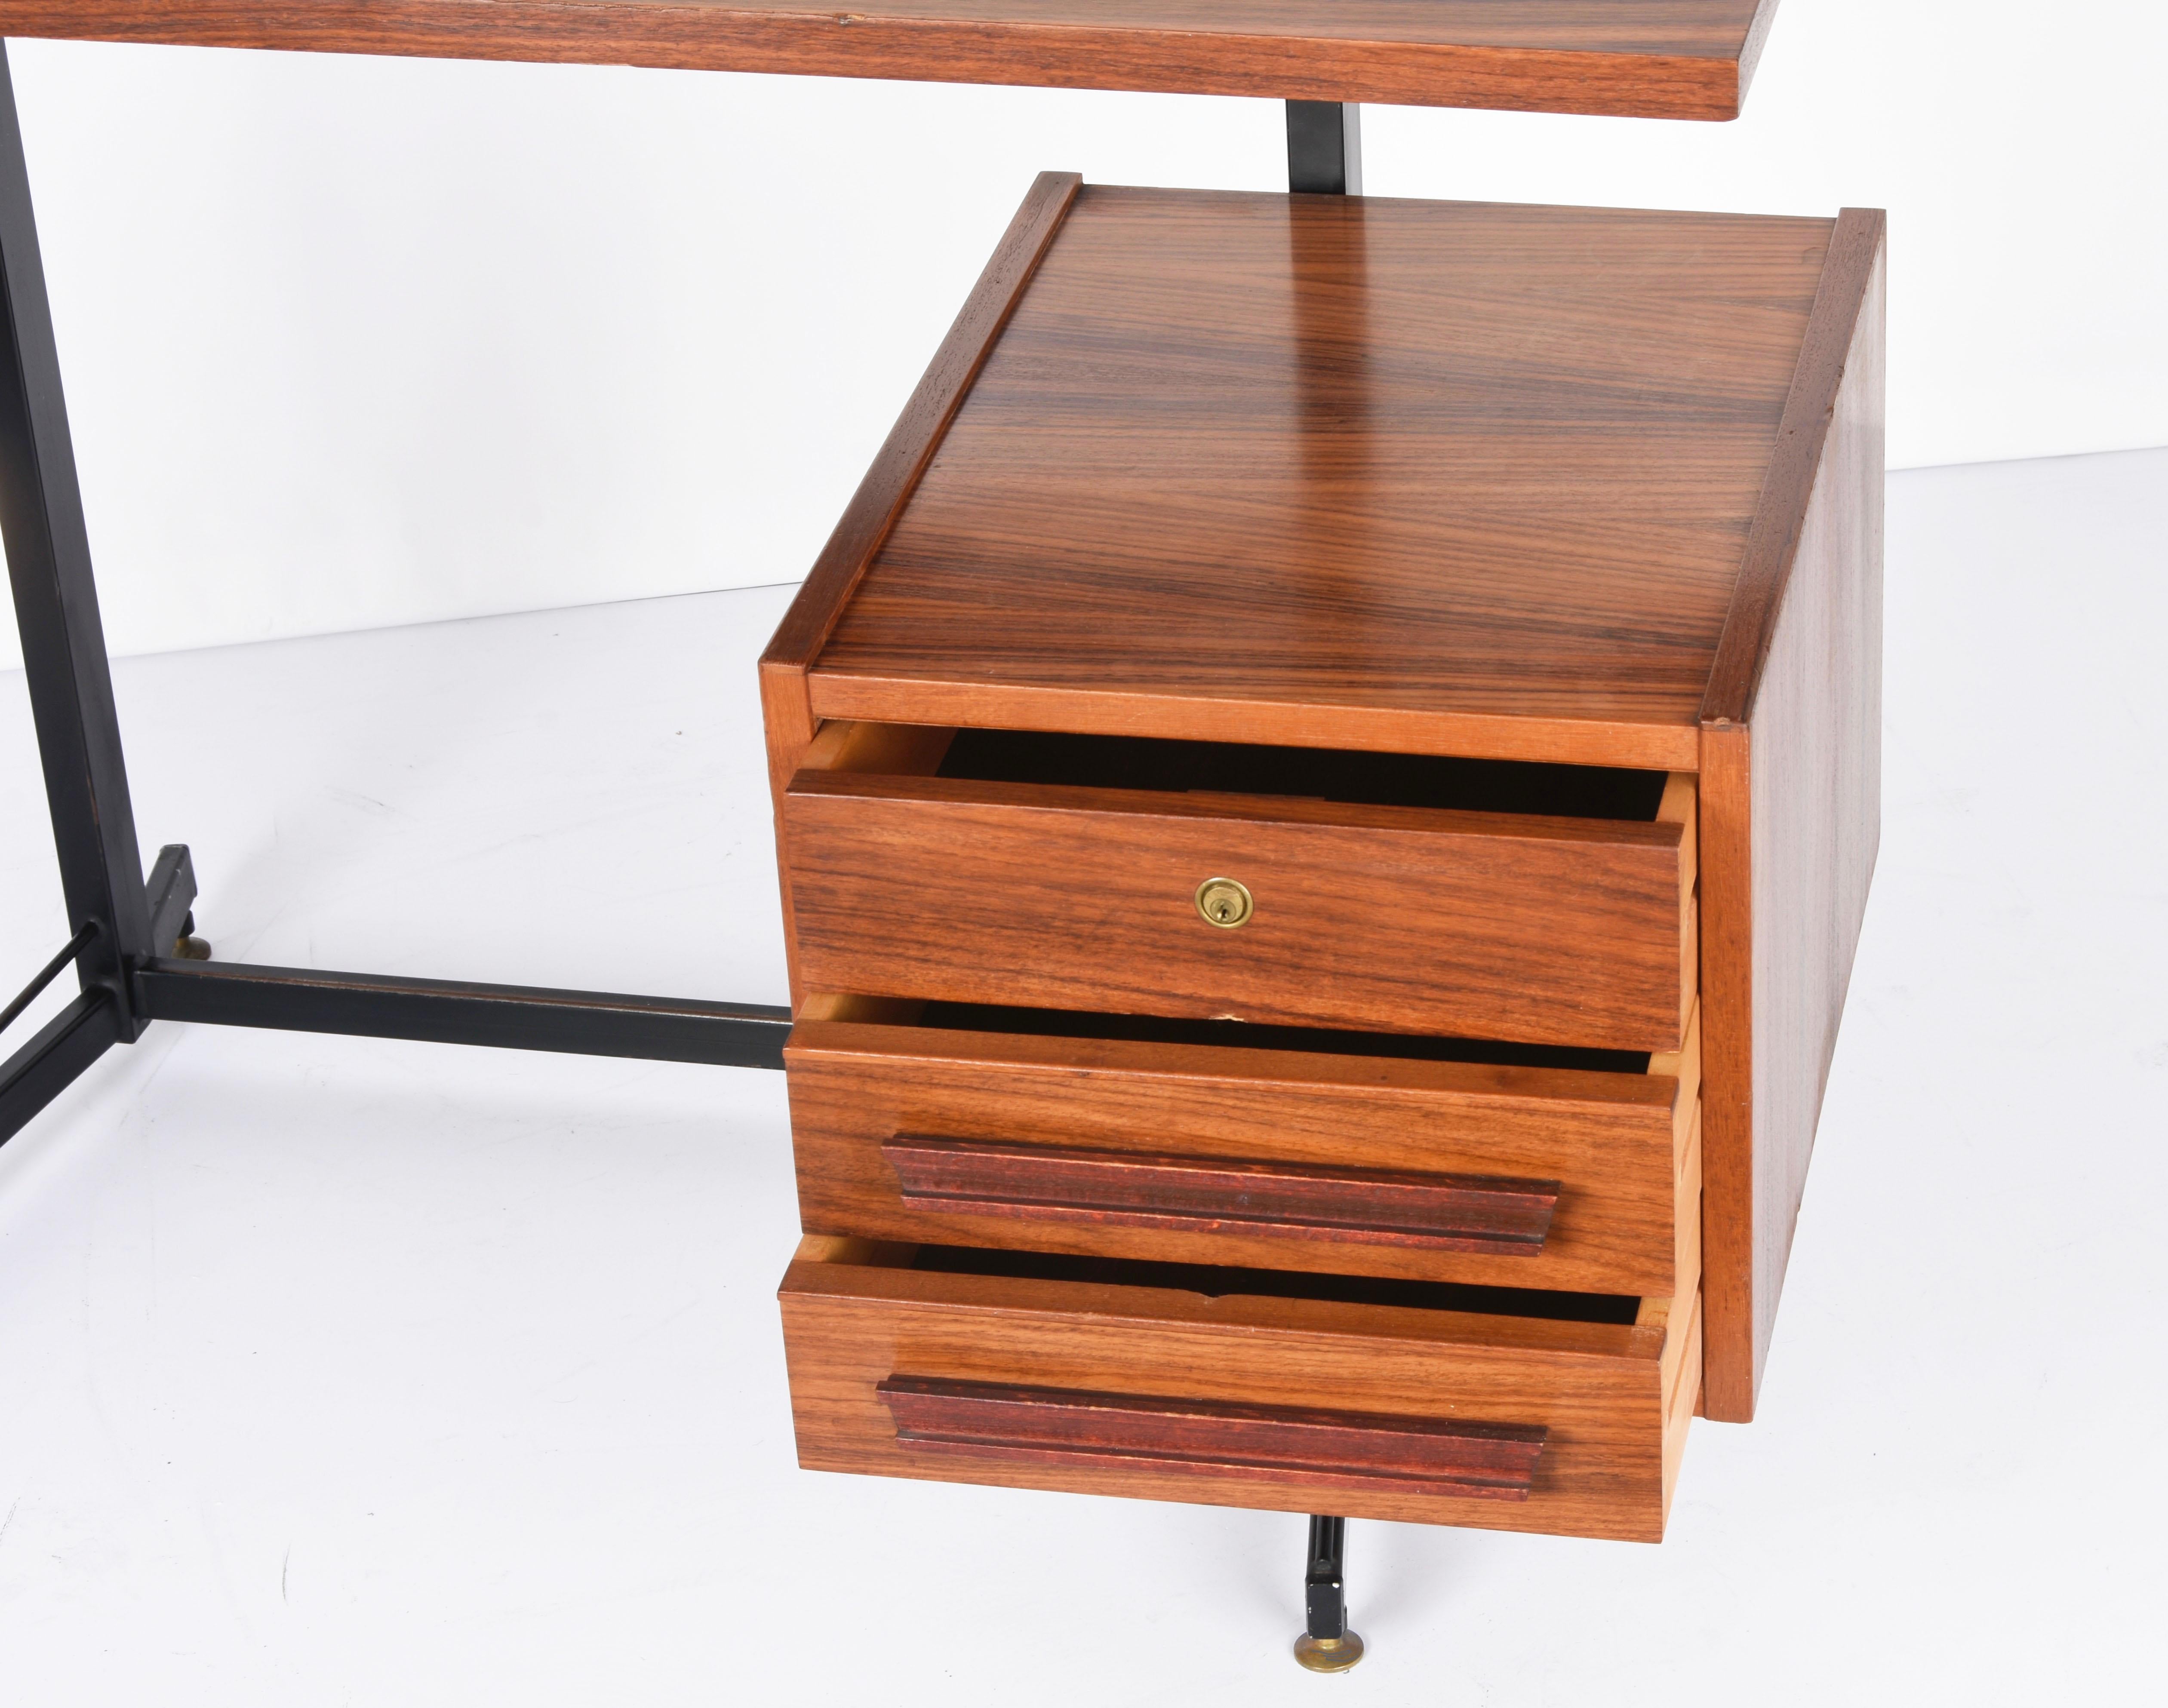 Midcentury Wood, Black Metal and Brass Italian Folding Desk with Drawers, 1960s For Sale 7